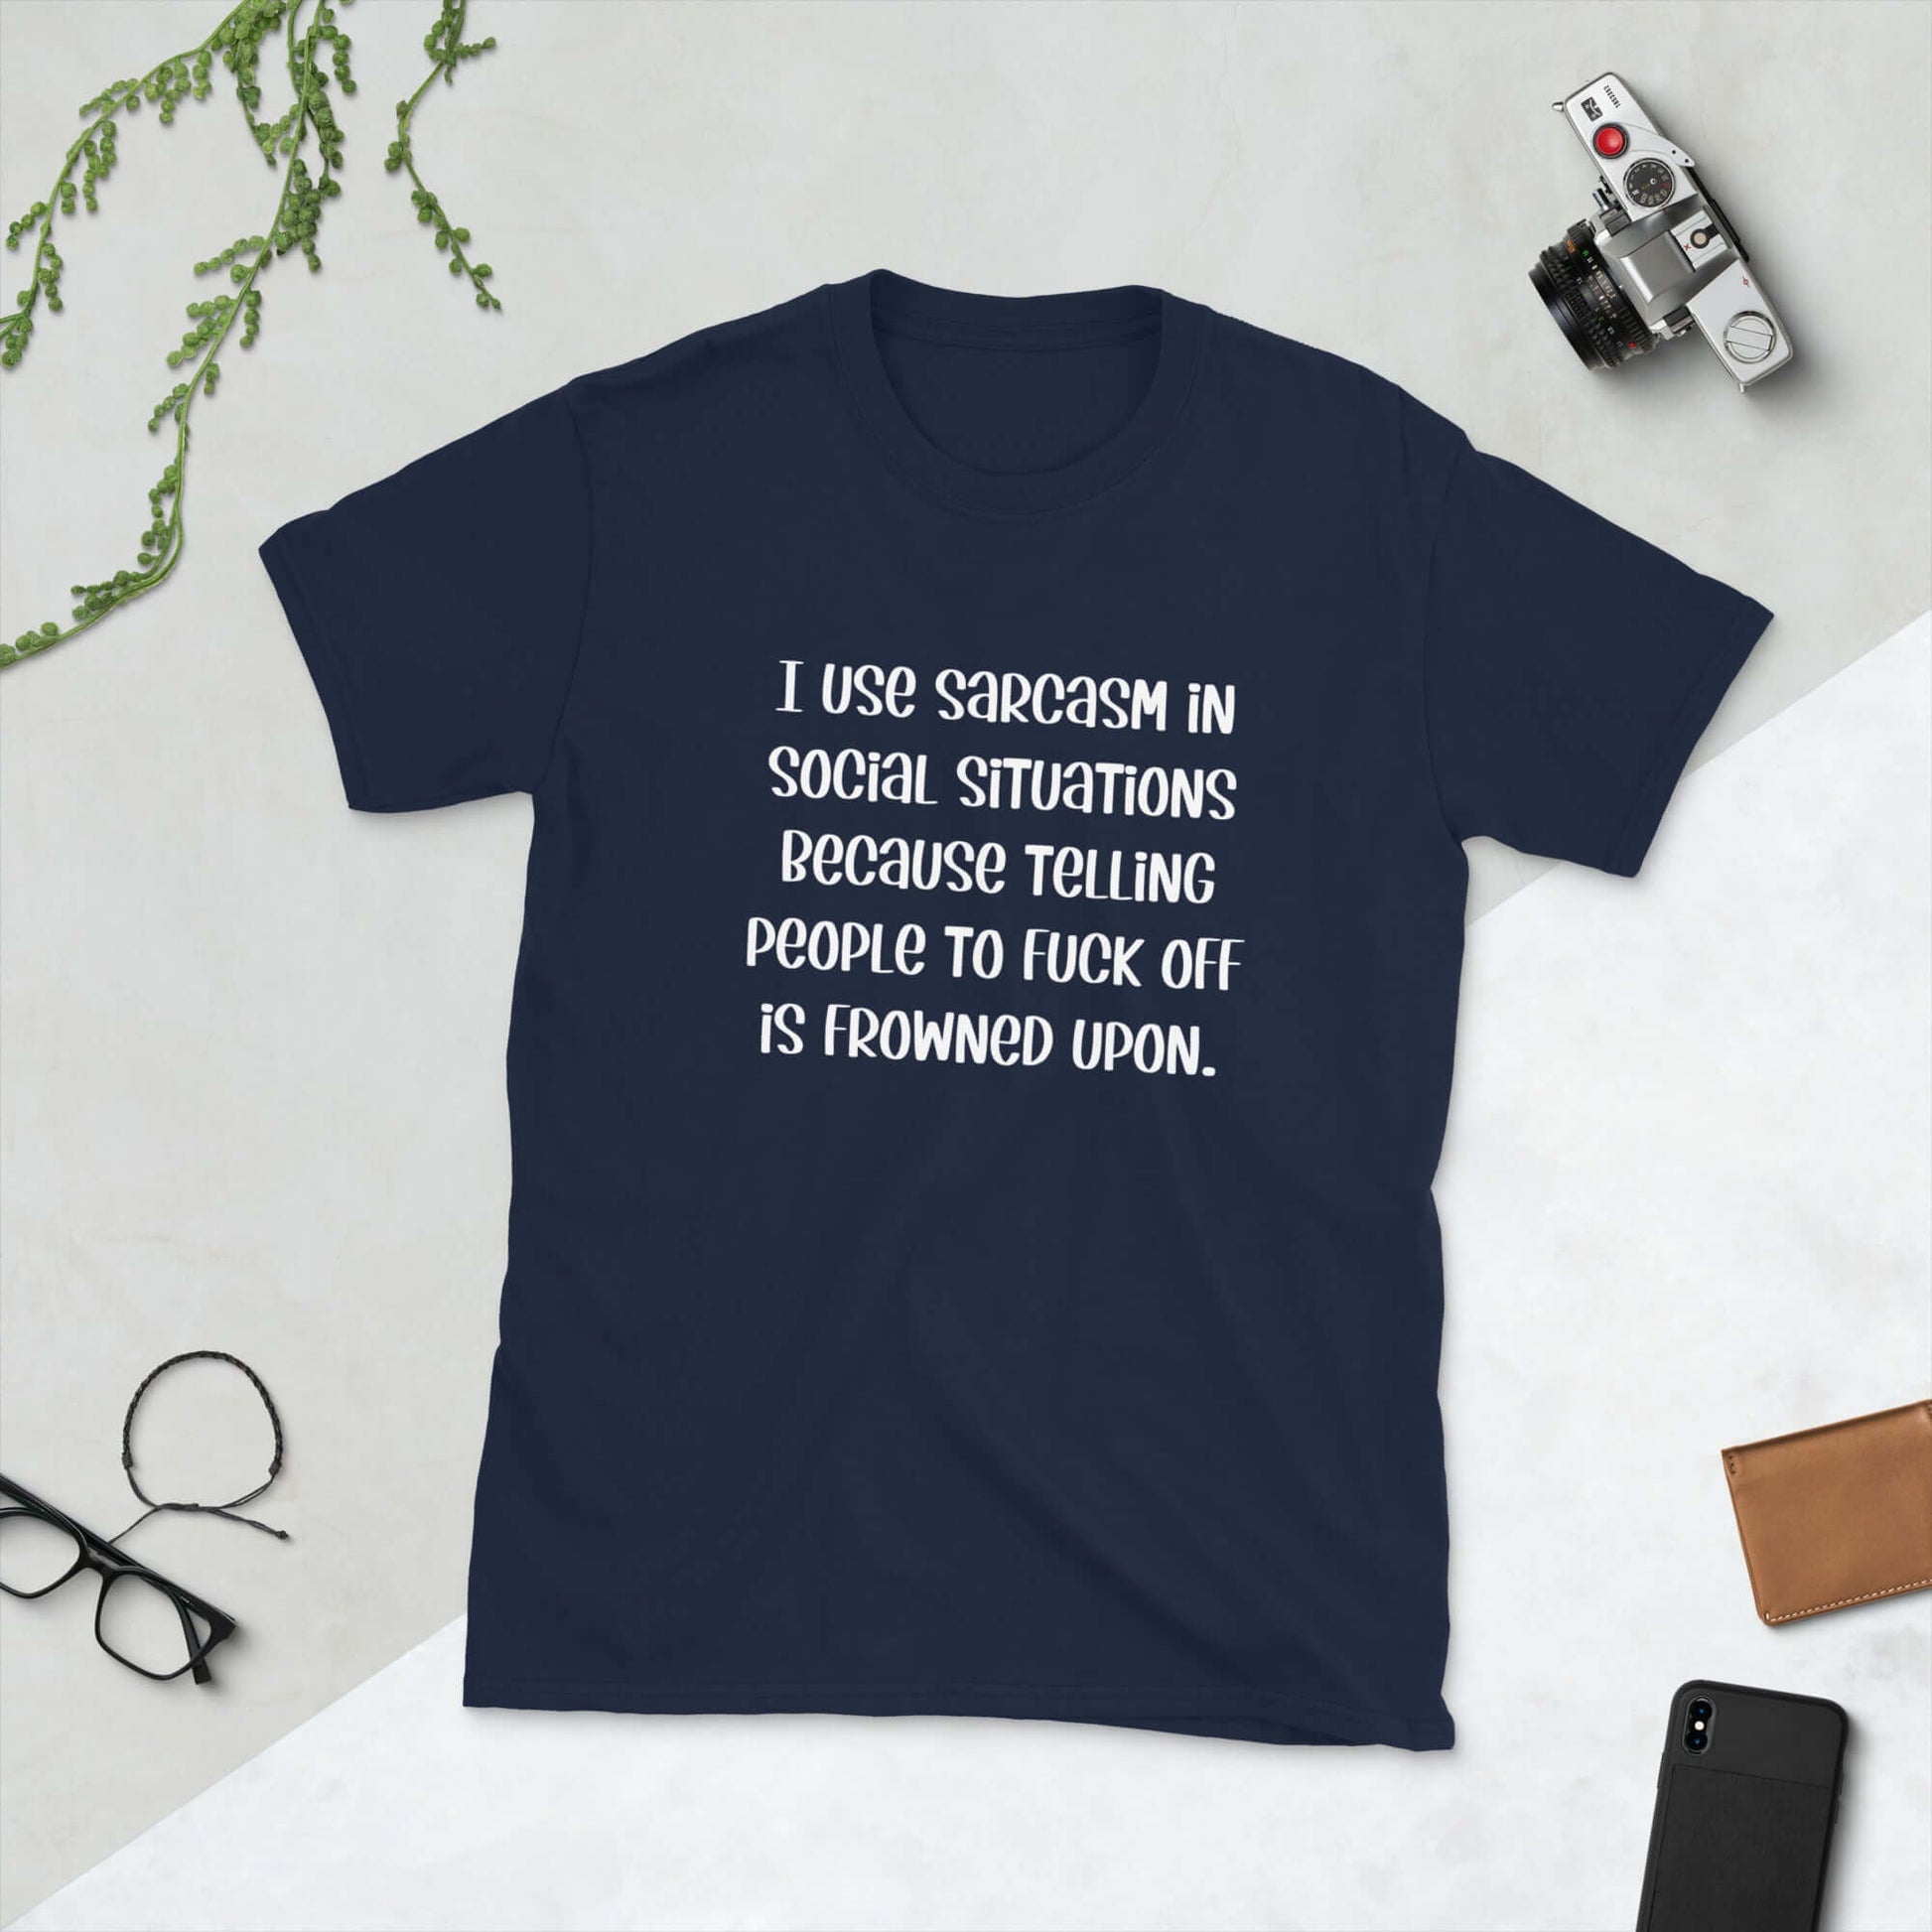 Navy blue t-shirt with the phrase I use sarcasm in social situations because telling people to fuck off is frowned upon printed on the front.